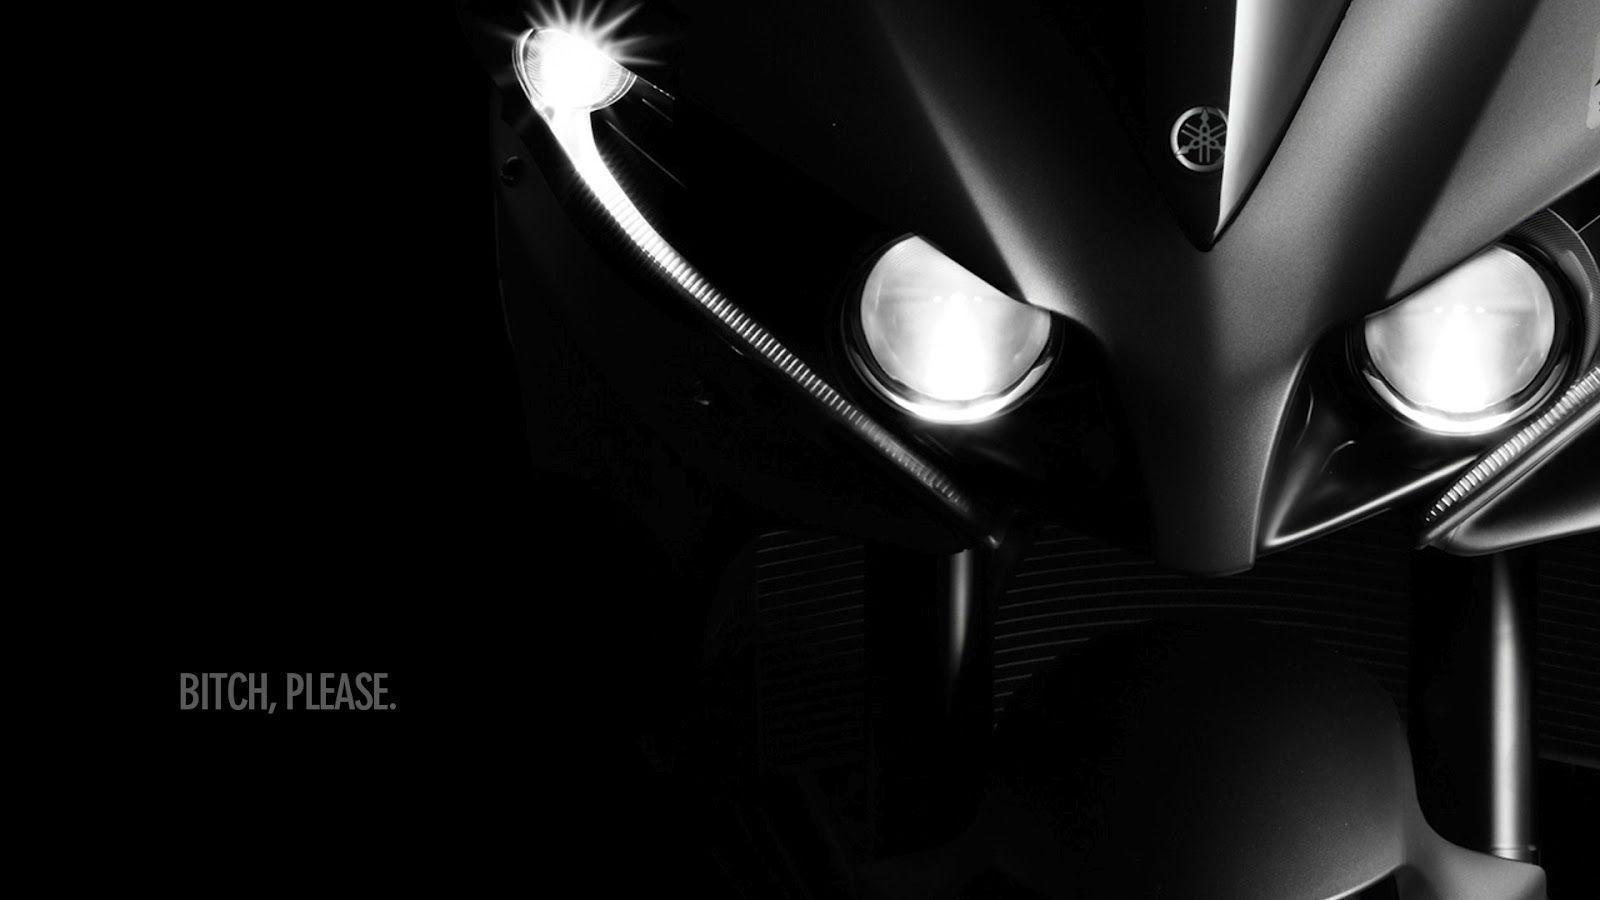 TELEPORT SEQUENCE INITIATED: 2012 Yamaha R1 Wallpaper